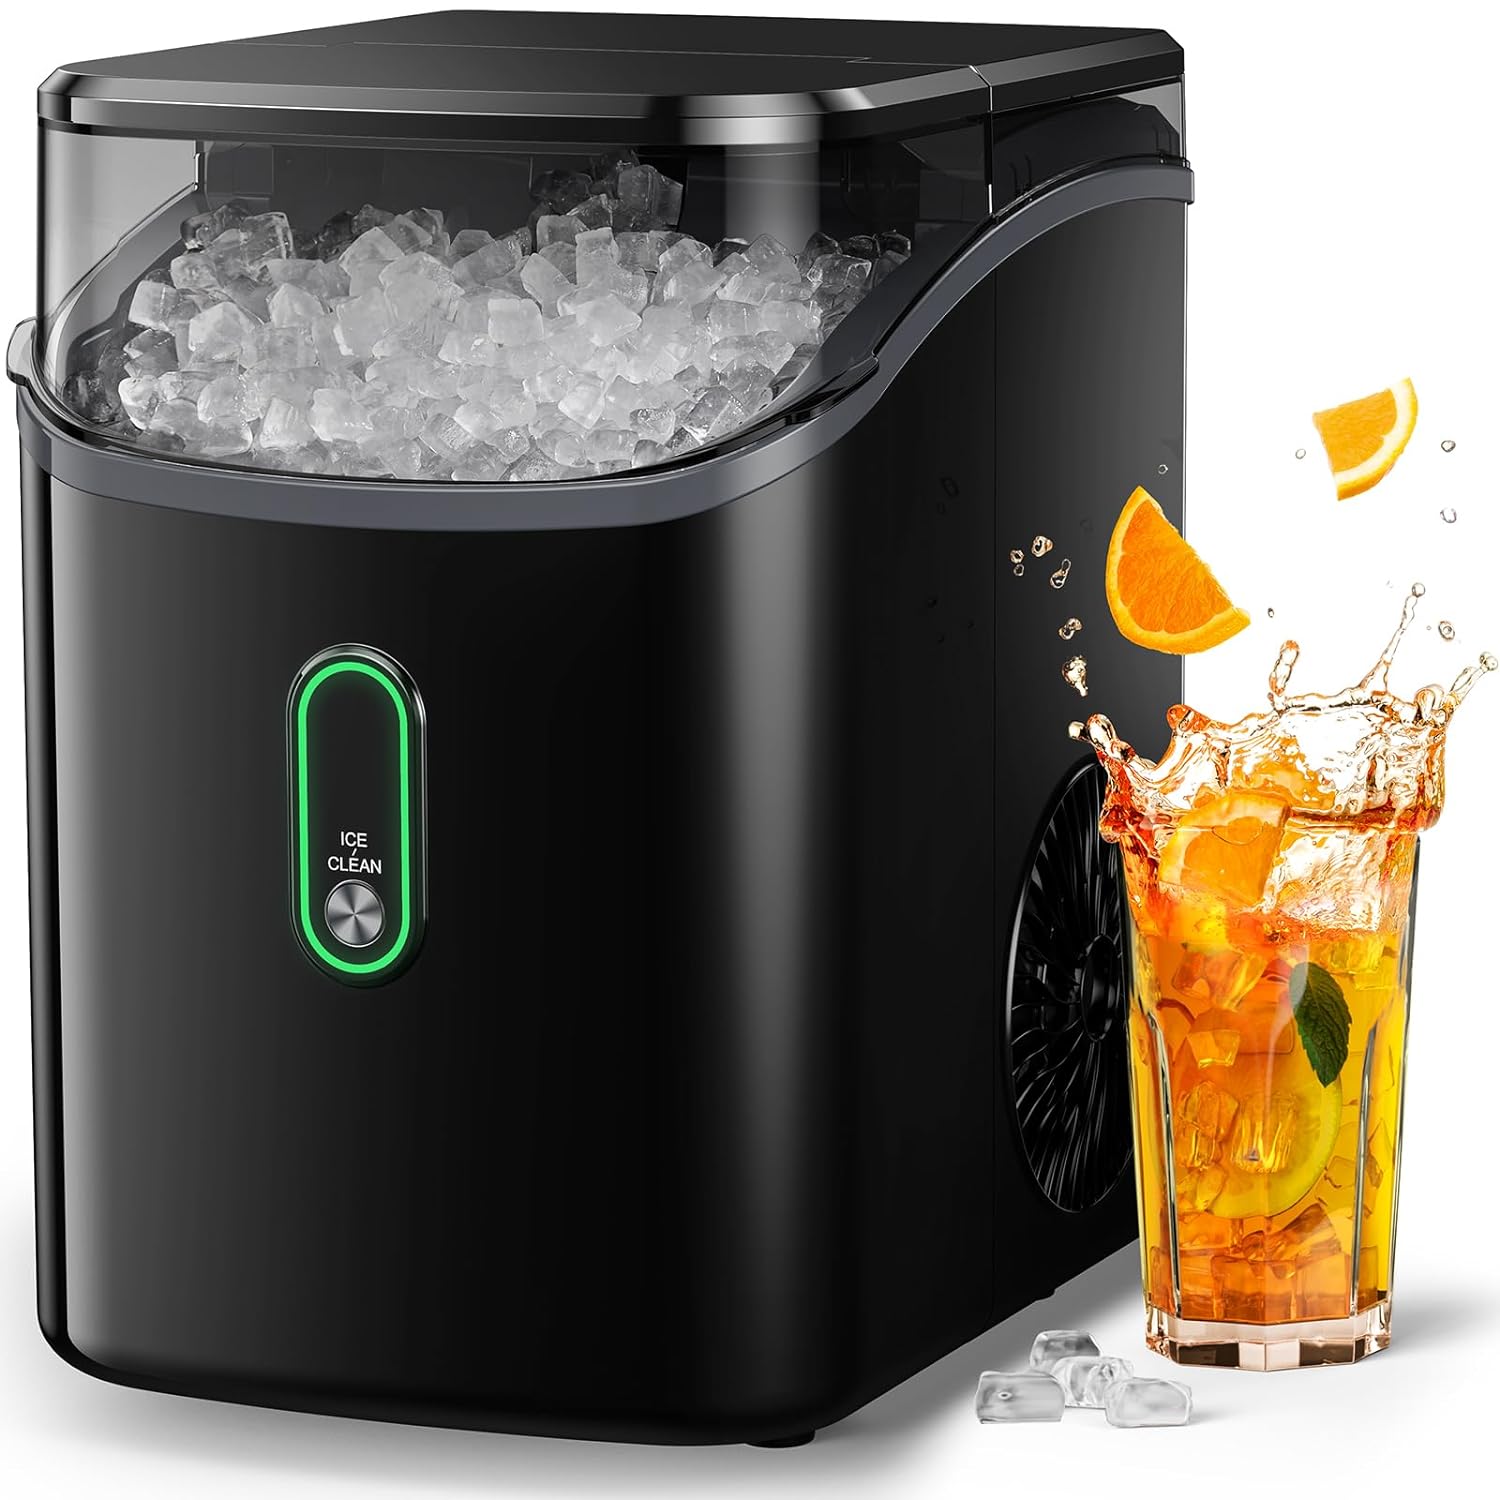 Nugget Ice Maker Countertop, 55 Lbs/Day, Chewable Ice Maker, Rapid